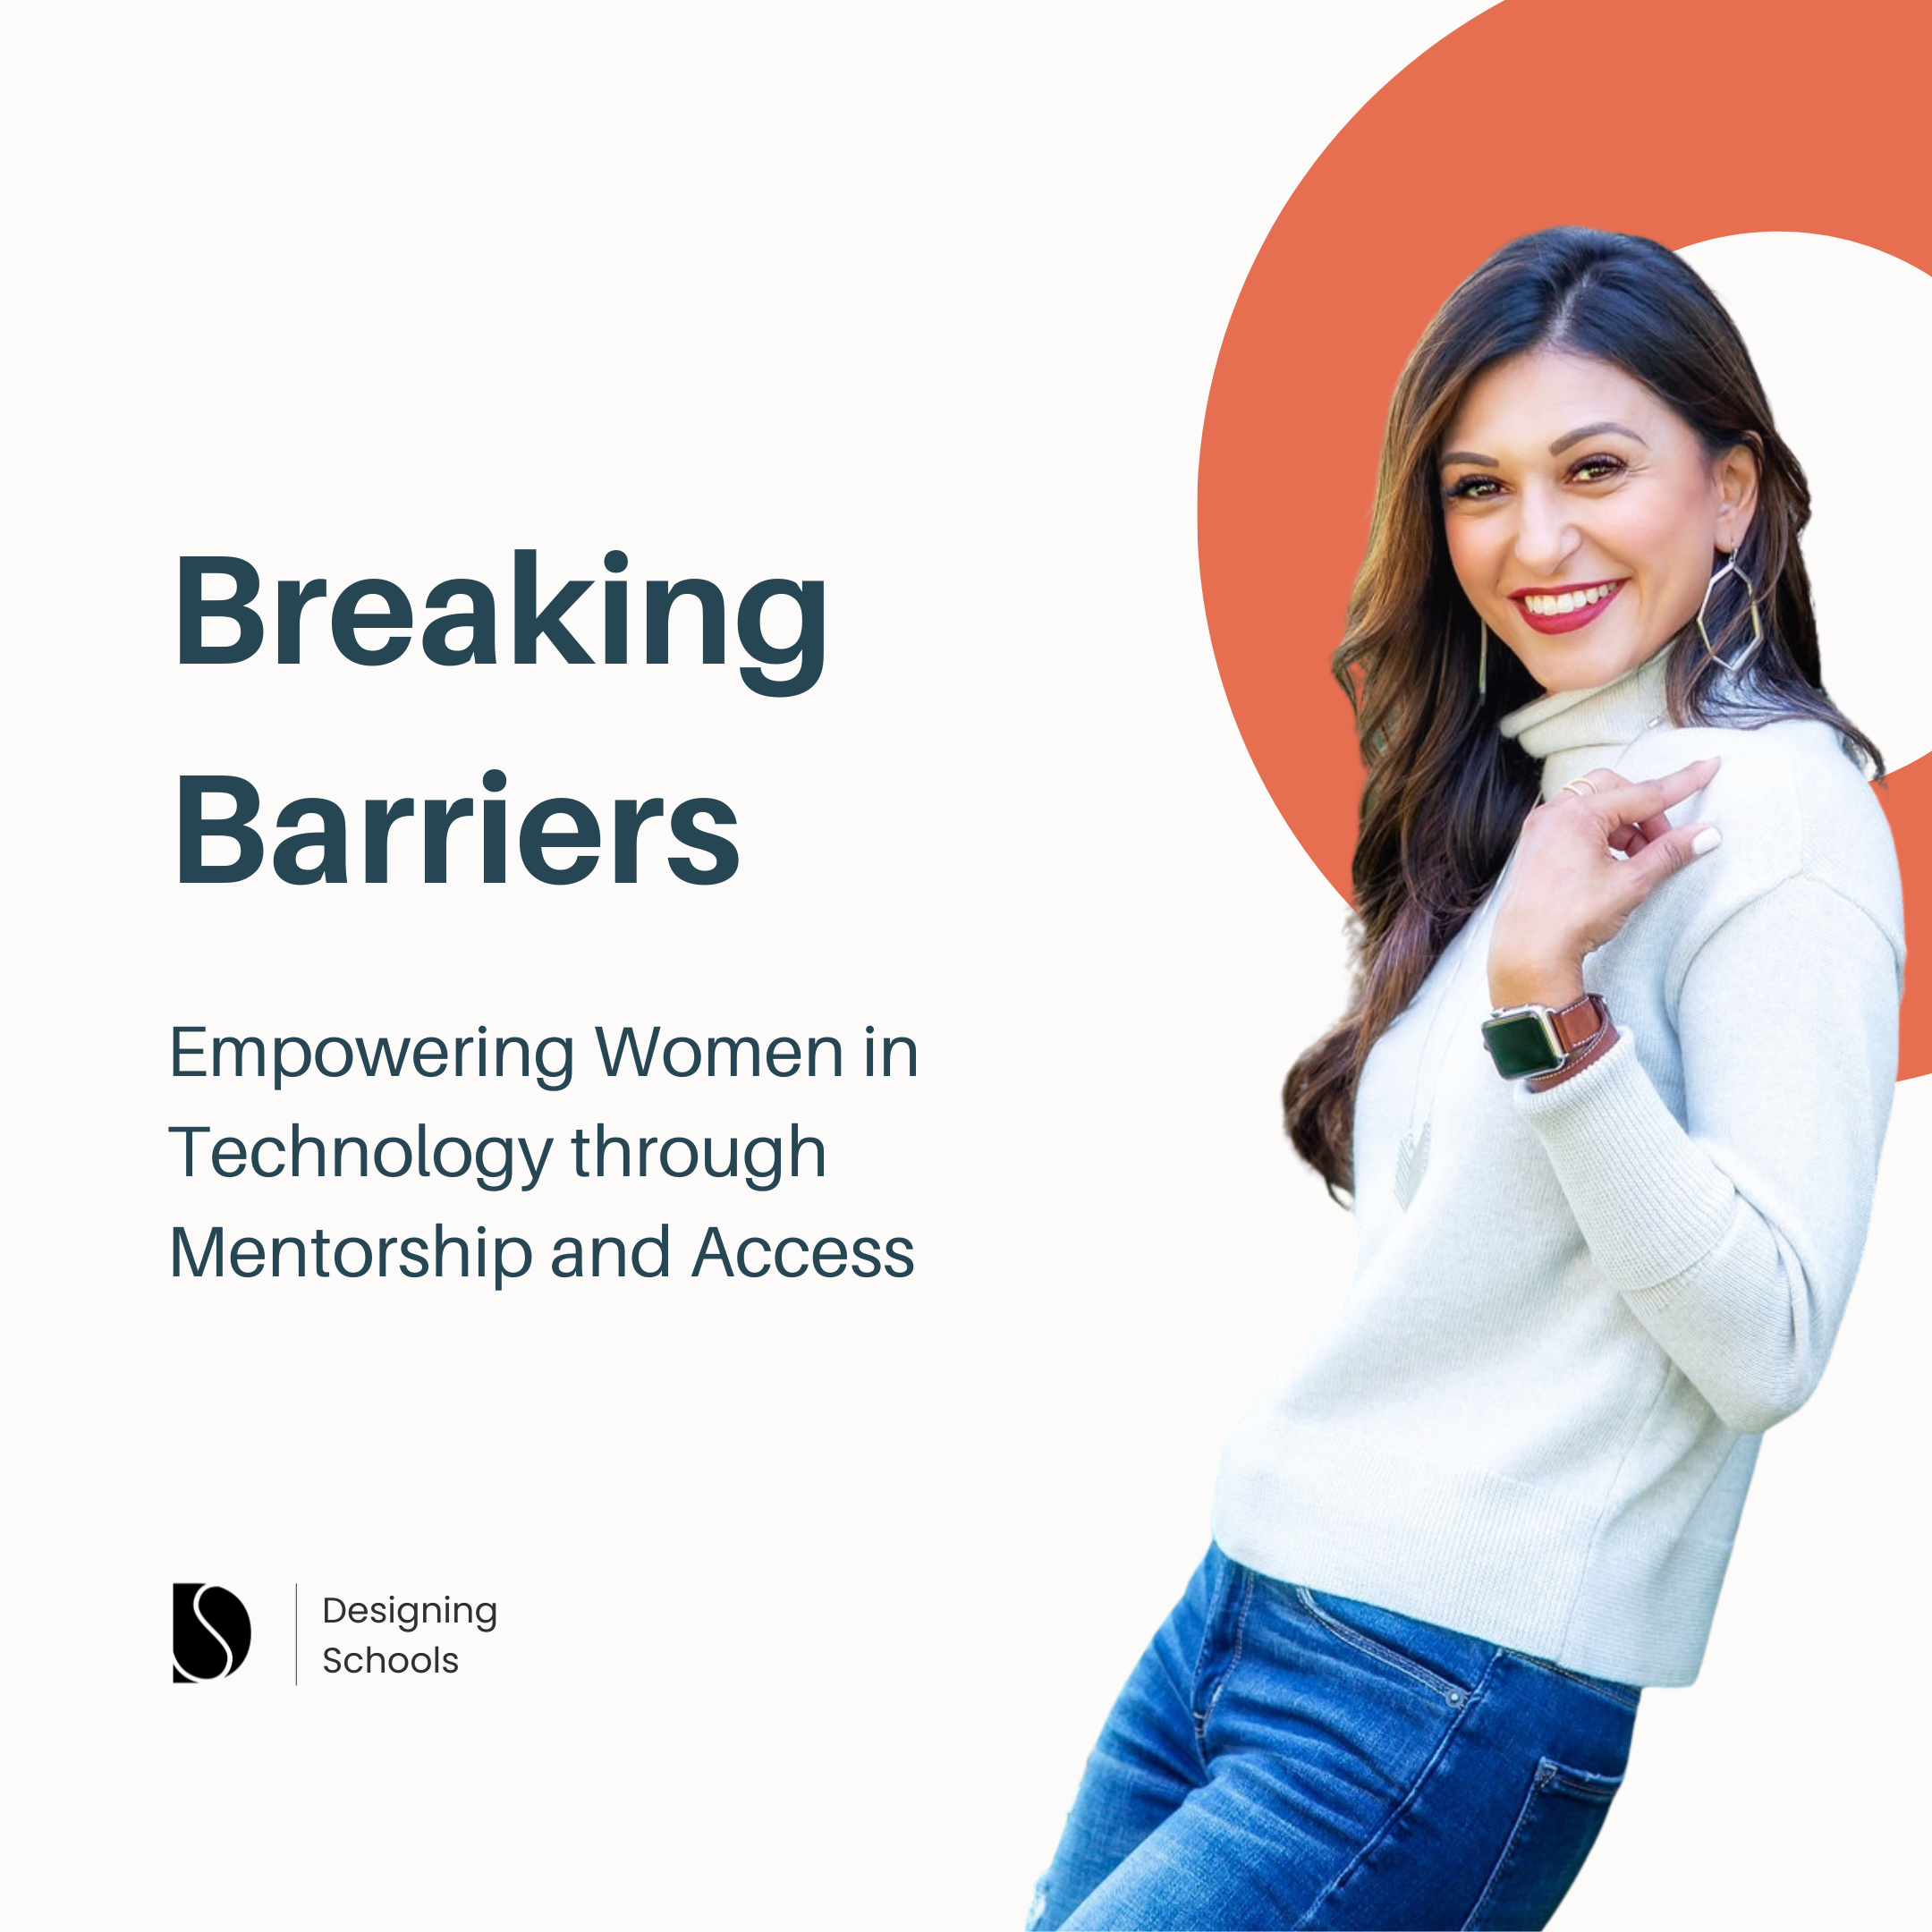 Breaking Barriers: Empowering Women in Technology through Mentorship and Access